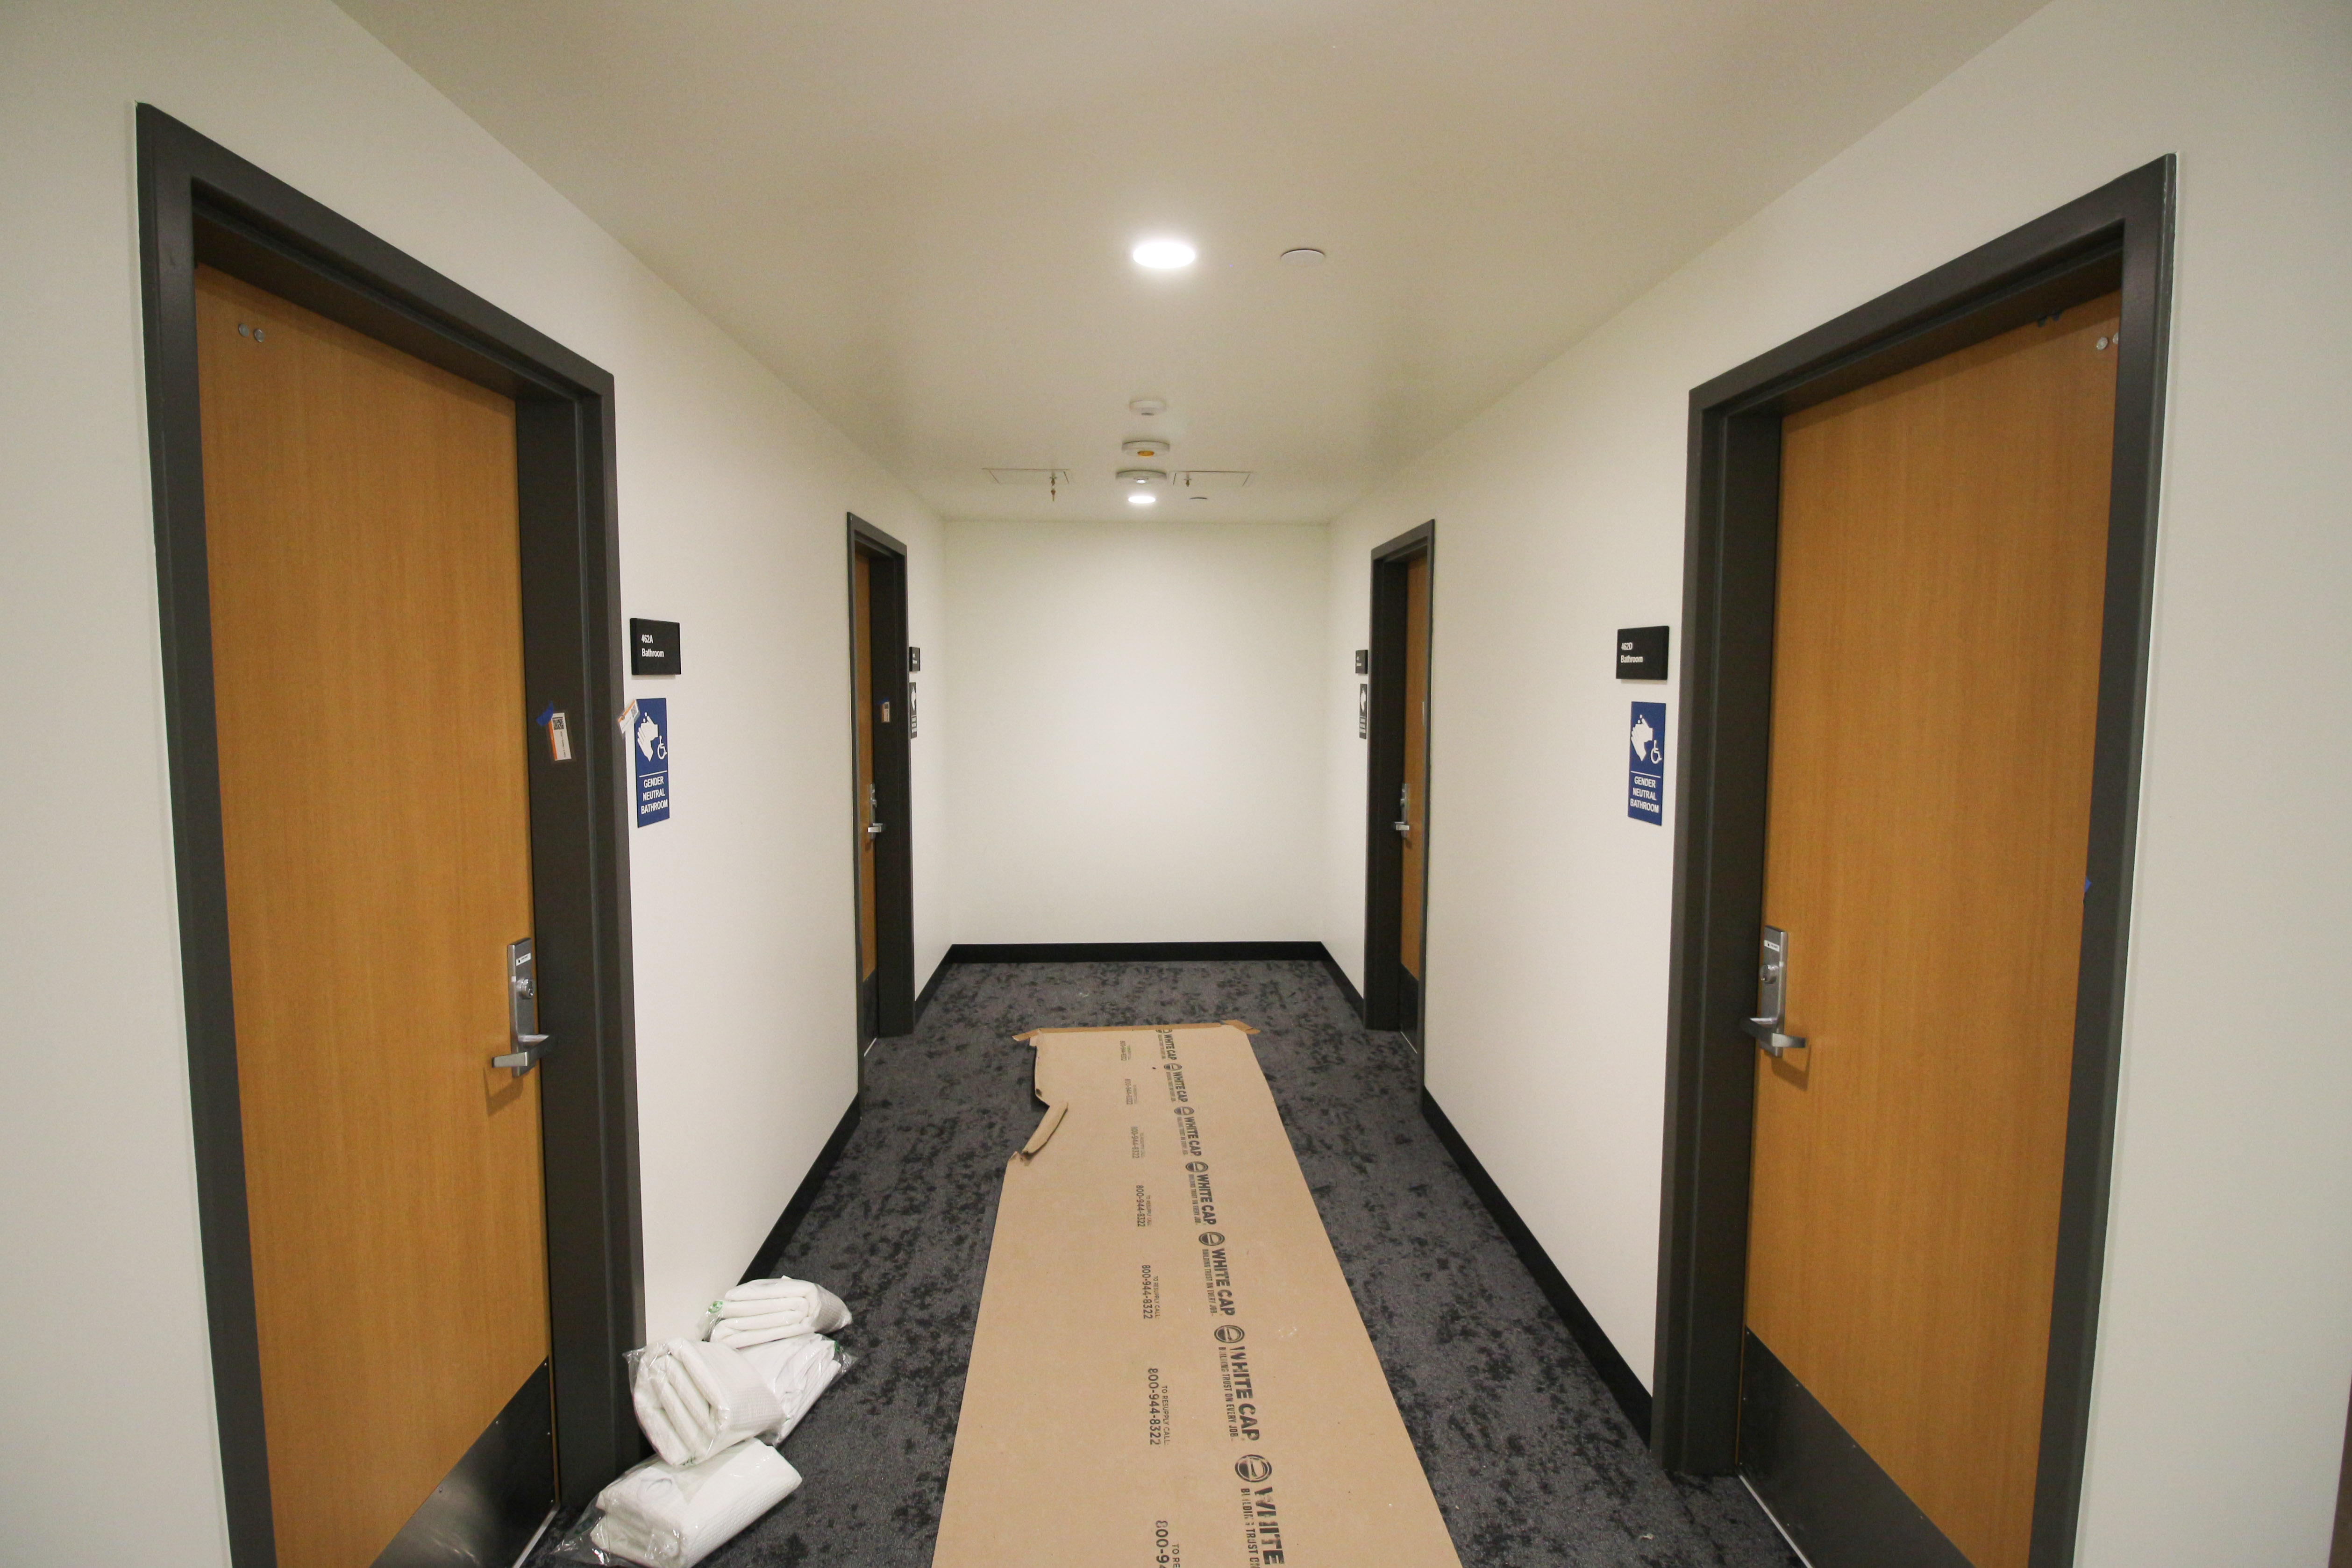 Short hallway with doors to gender-neutral bathrooms on either side